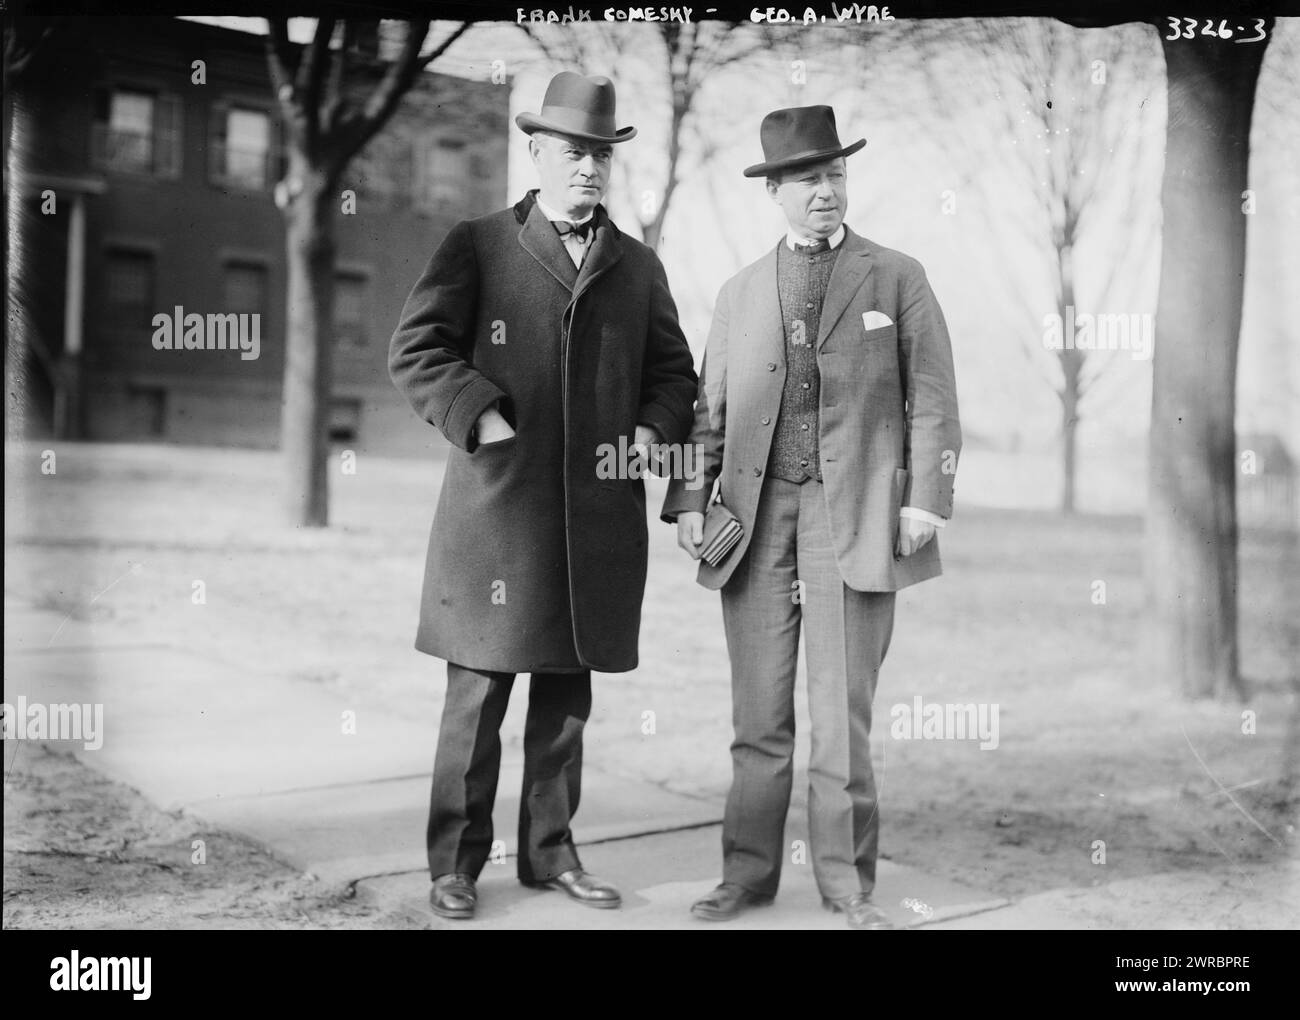 Frank Comesky and Geo. A Wyre, Photograph shows defense attorneys for William V. Cleary who was tried for the murder of Eugene M. Newman, Dec. 1914., 1914 Dec., Glass negatives, 1 negative: glass Stock Photo